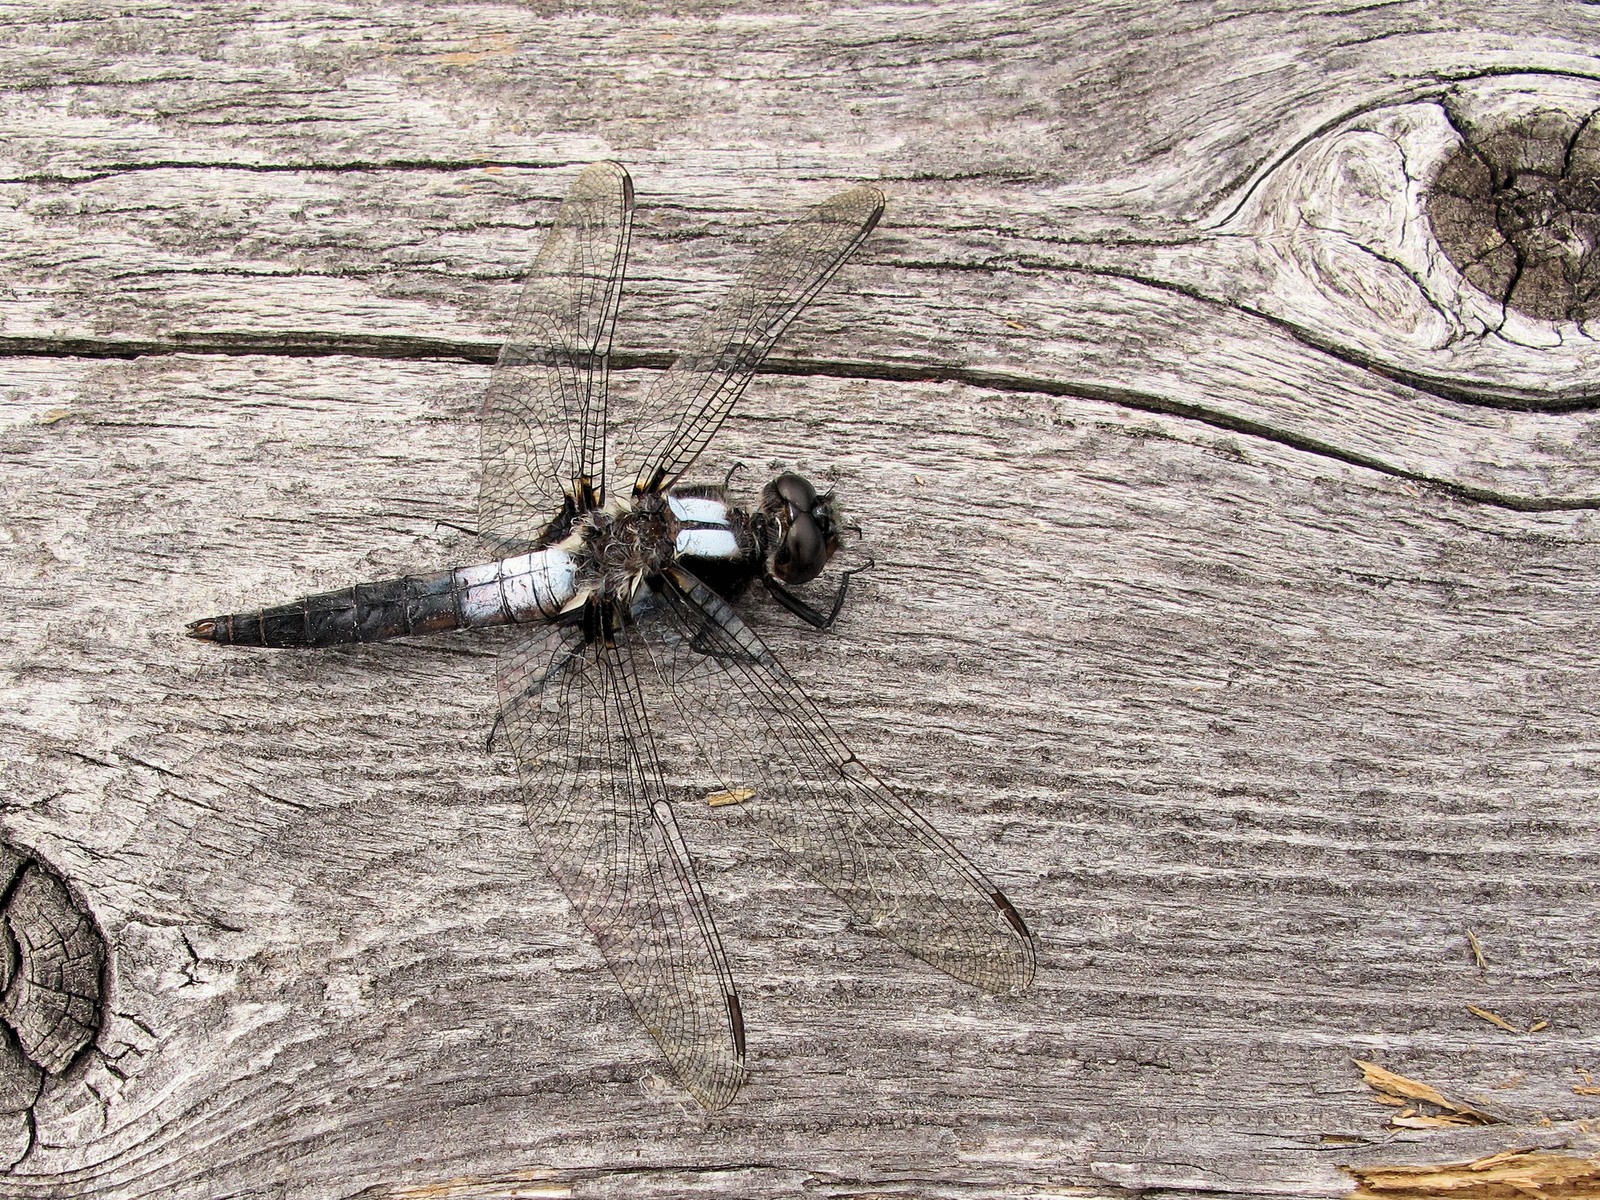 201006041205237 Chalk-fronted Corporal (Ladona julia) Dragonfly - Misery Bay NP, Manitoulin Island.JPG